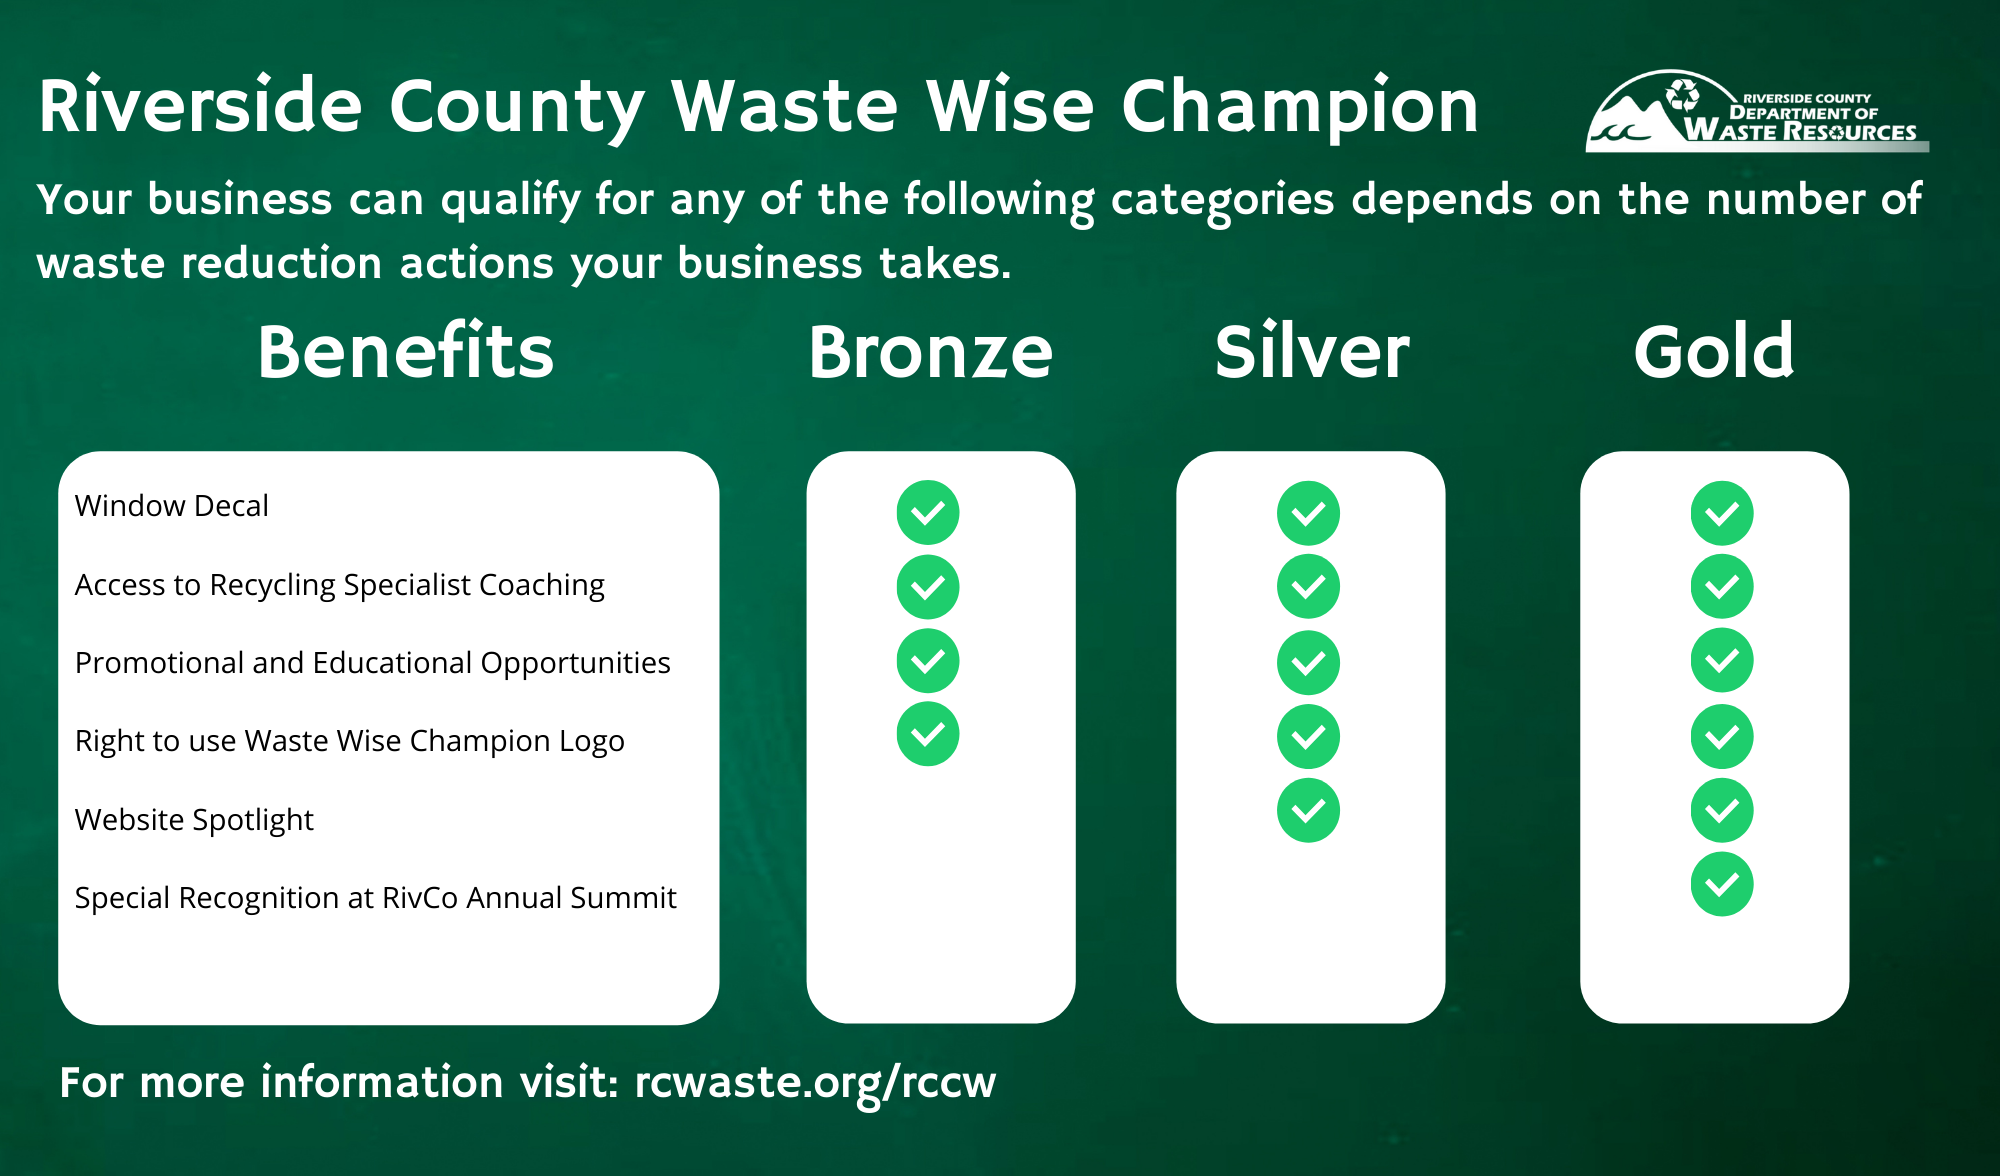 Riverside County Waste Wise Champion